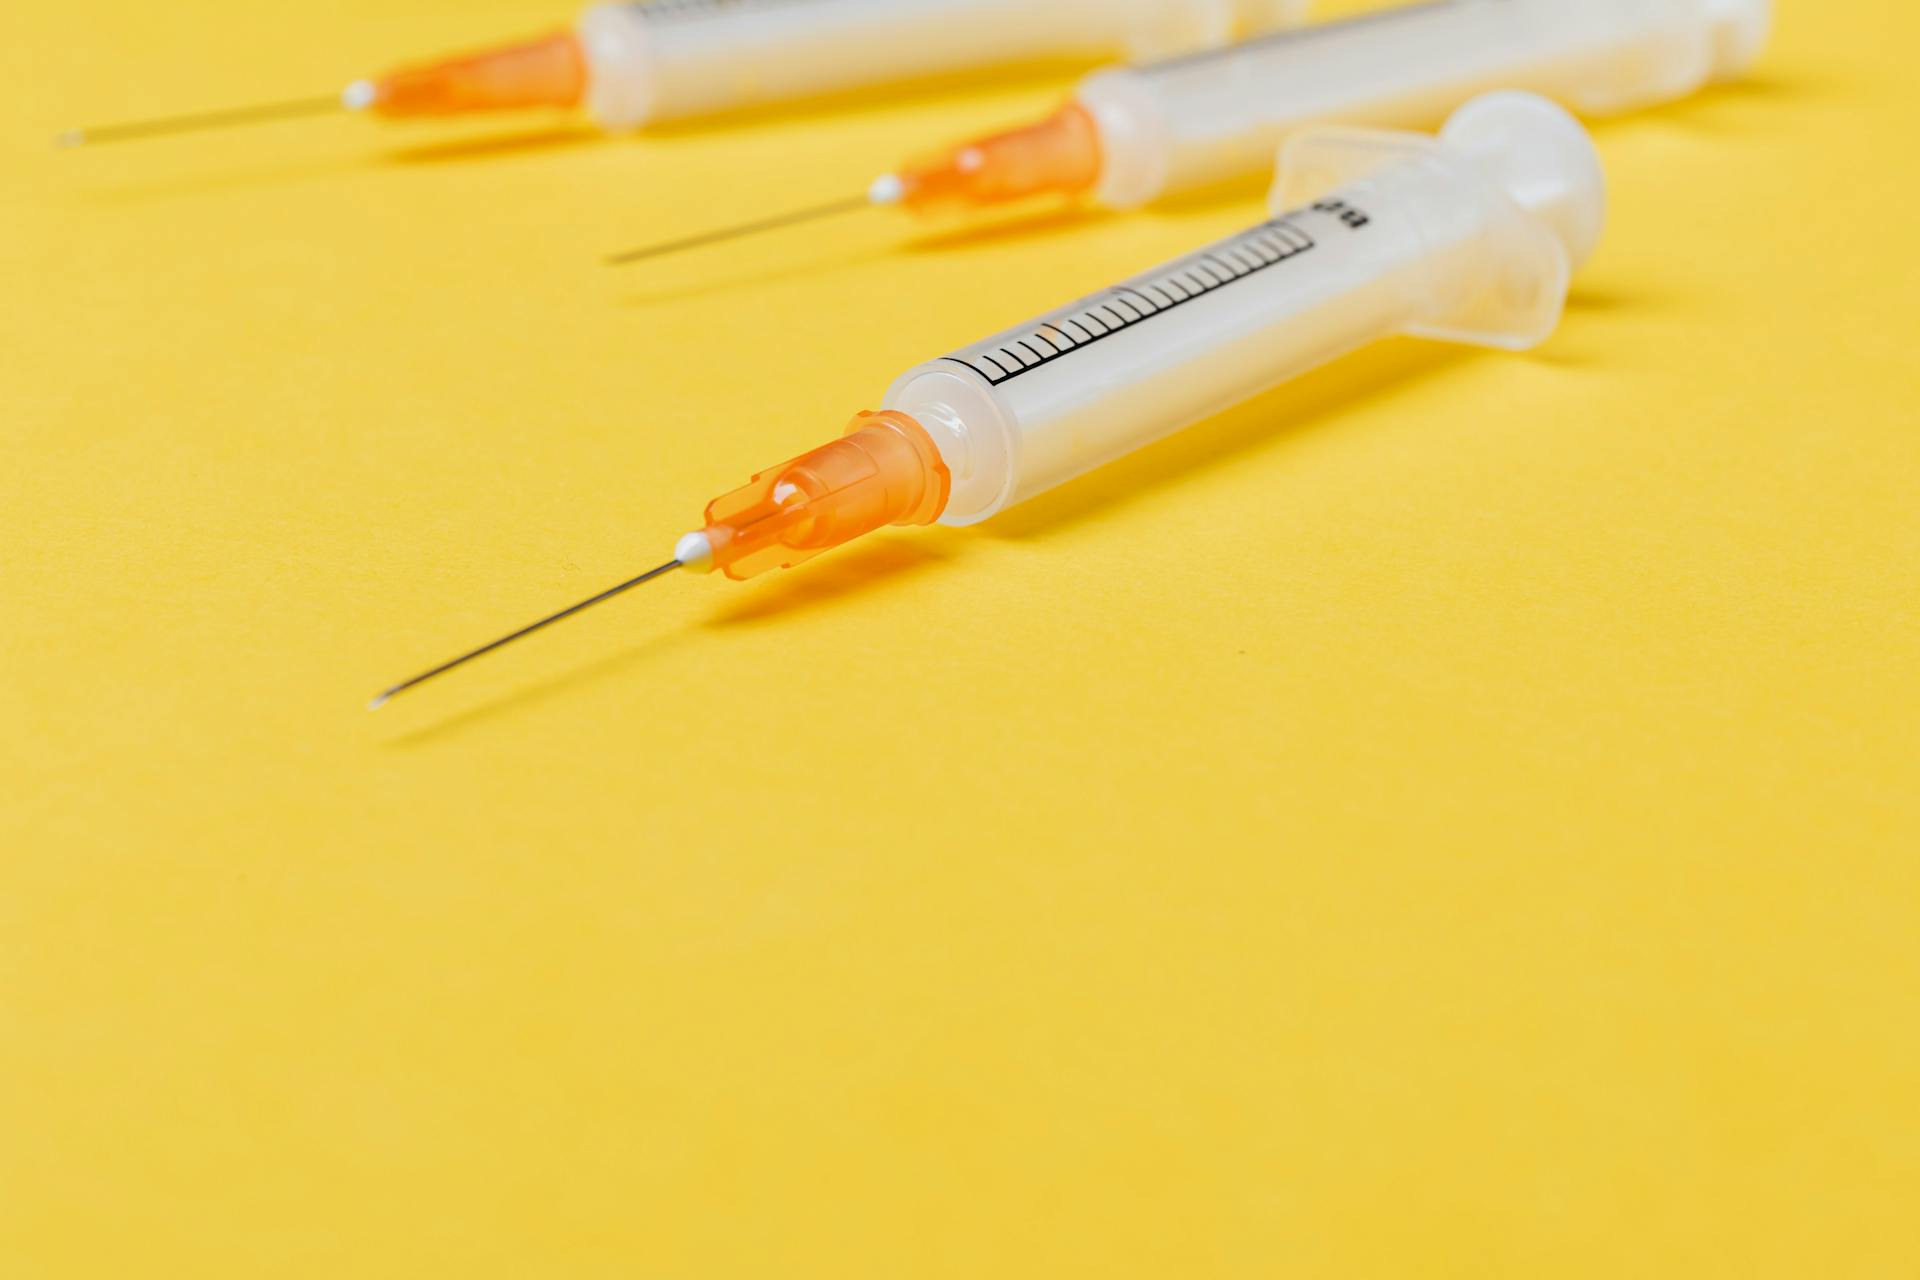 Medical single use disposable syringe without protective cover on needle and with empty barrel placed on bright yellow surface